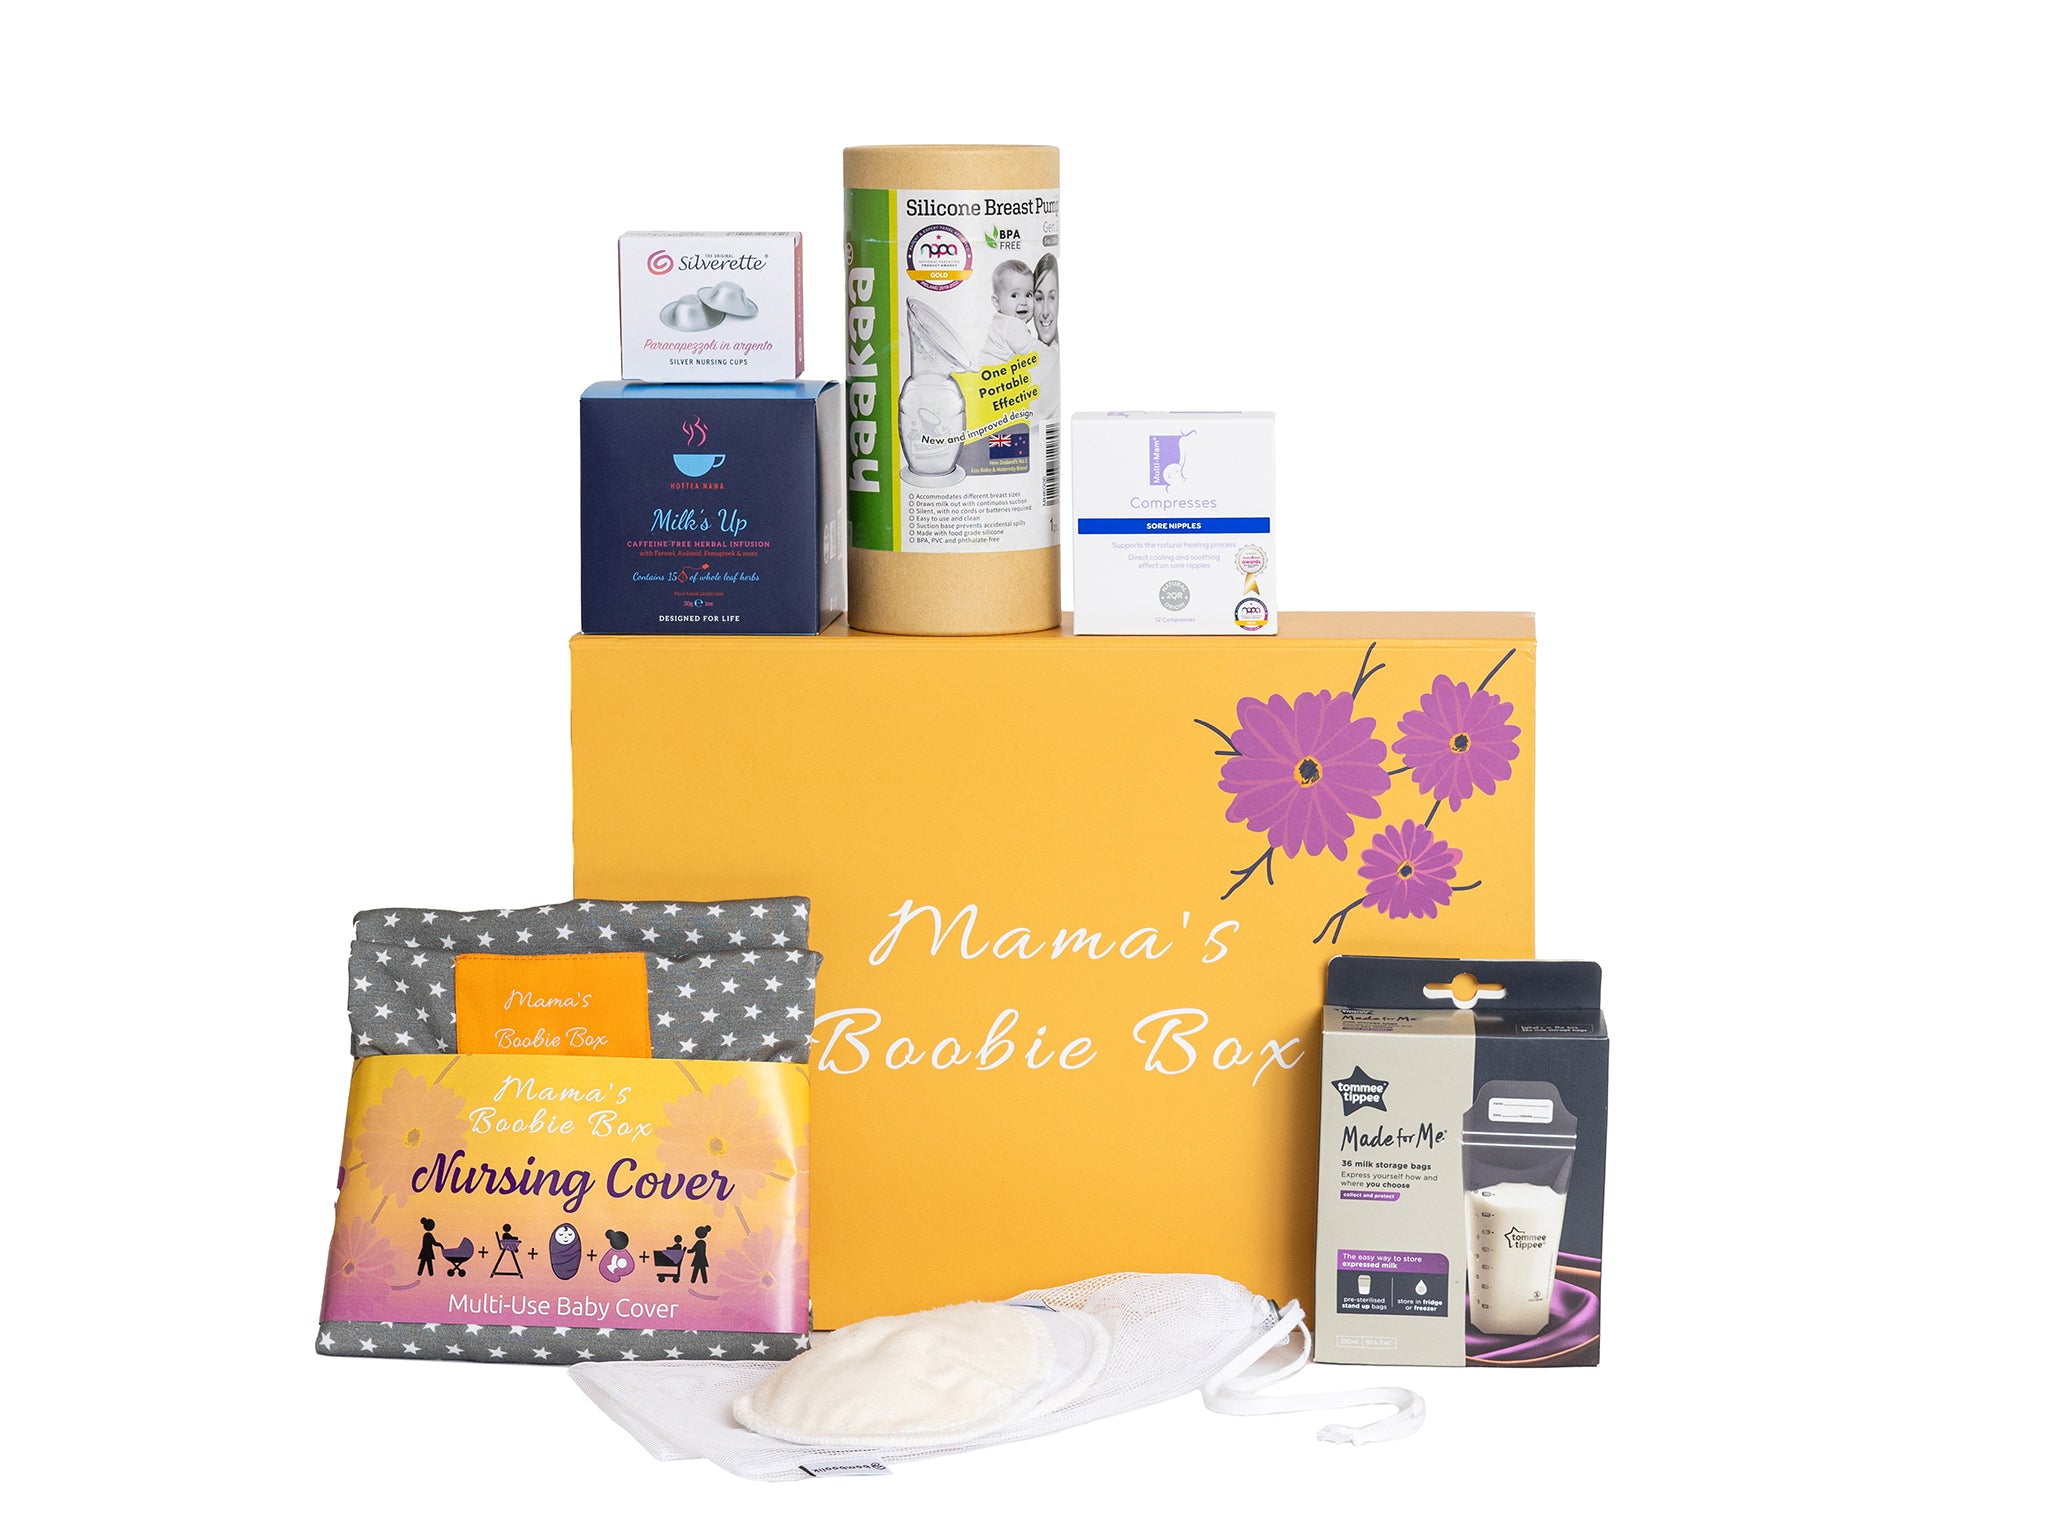 Breastfeeding Gift Box with items displayed at front of box by Mama&